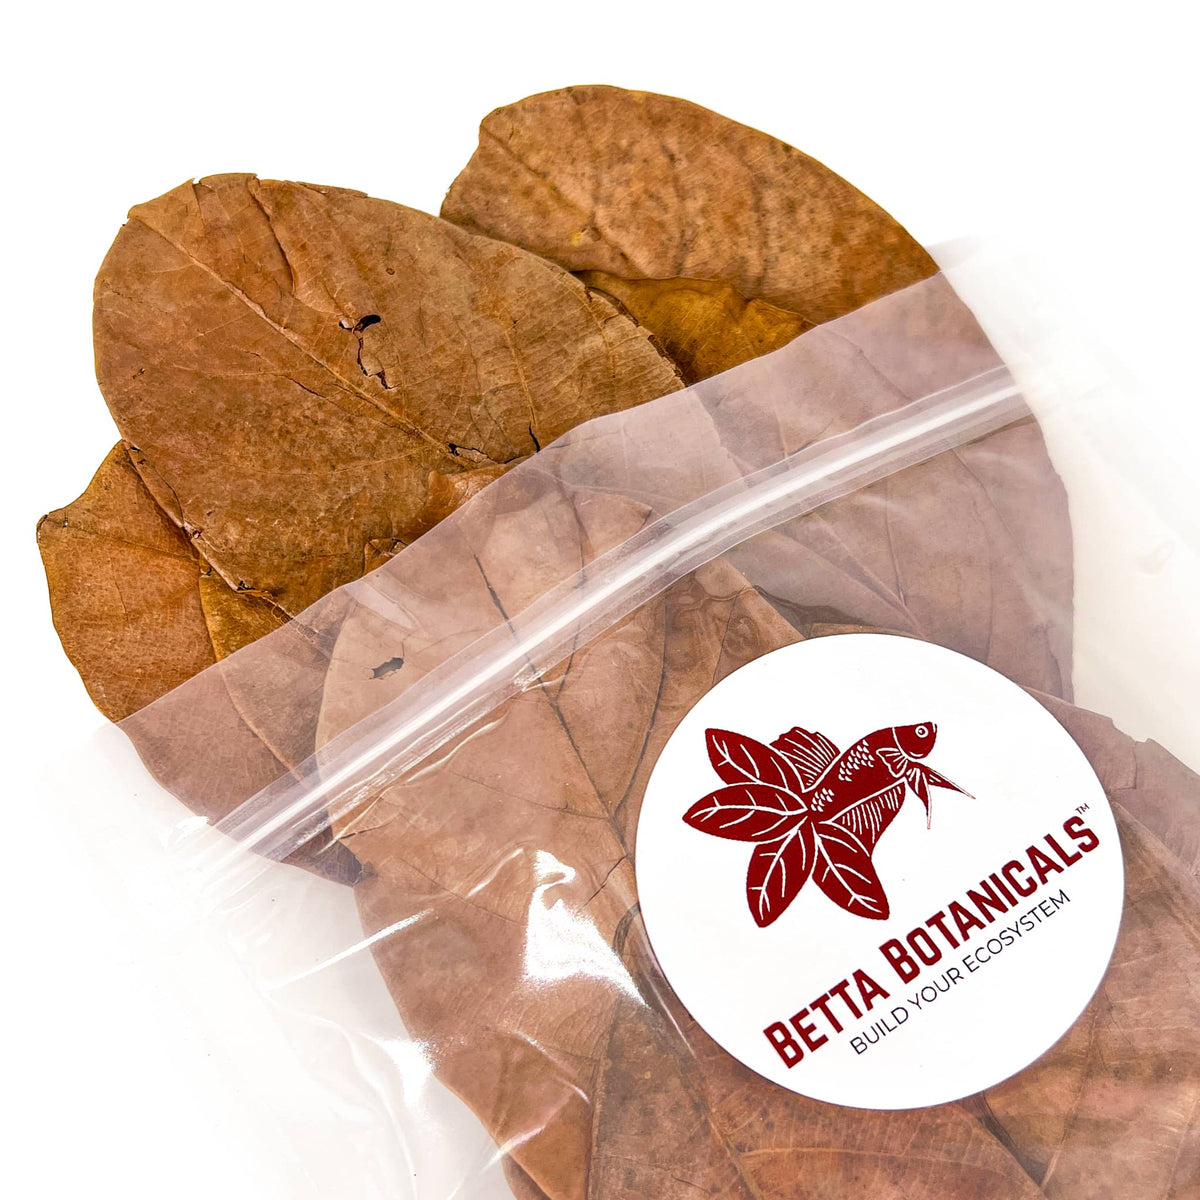 Dried Jackfruit Leaves for Aquarium Fish and Shrimp - Natural and Beneficial